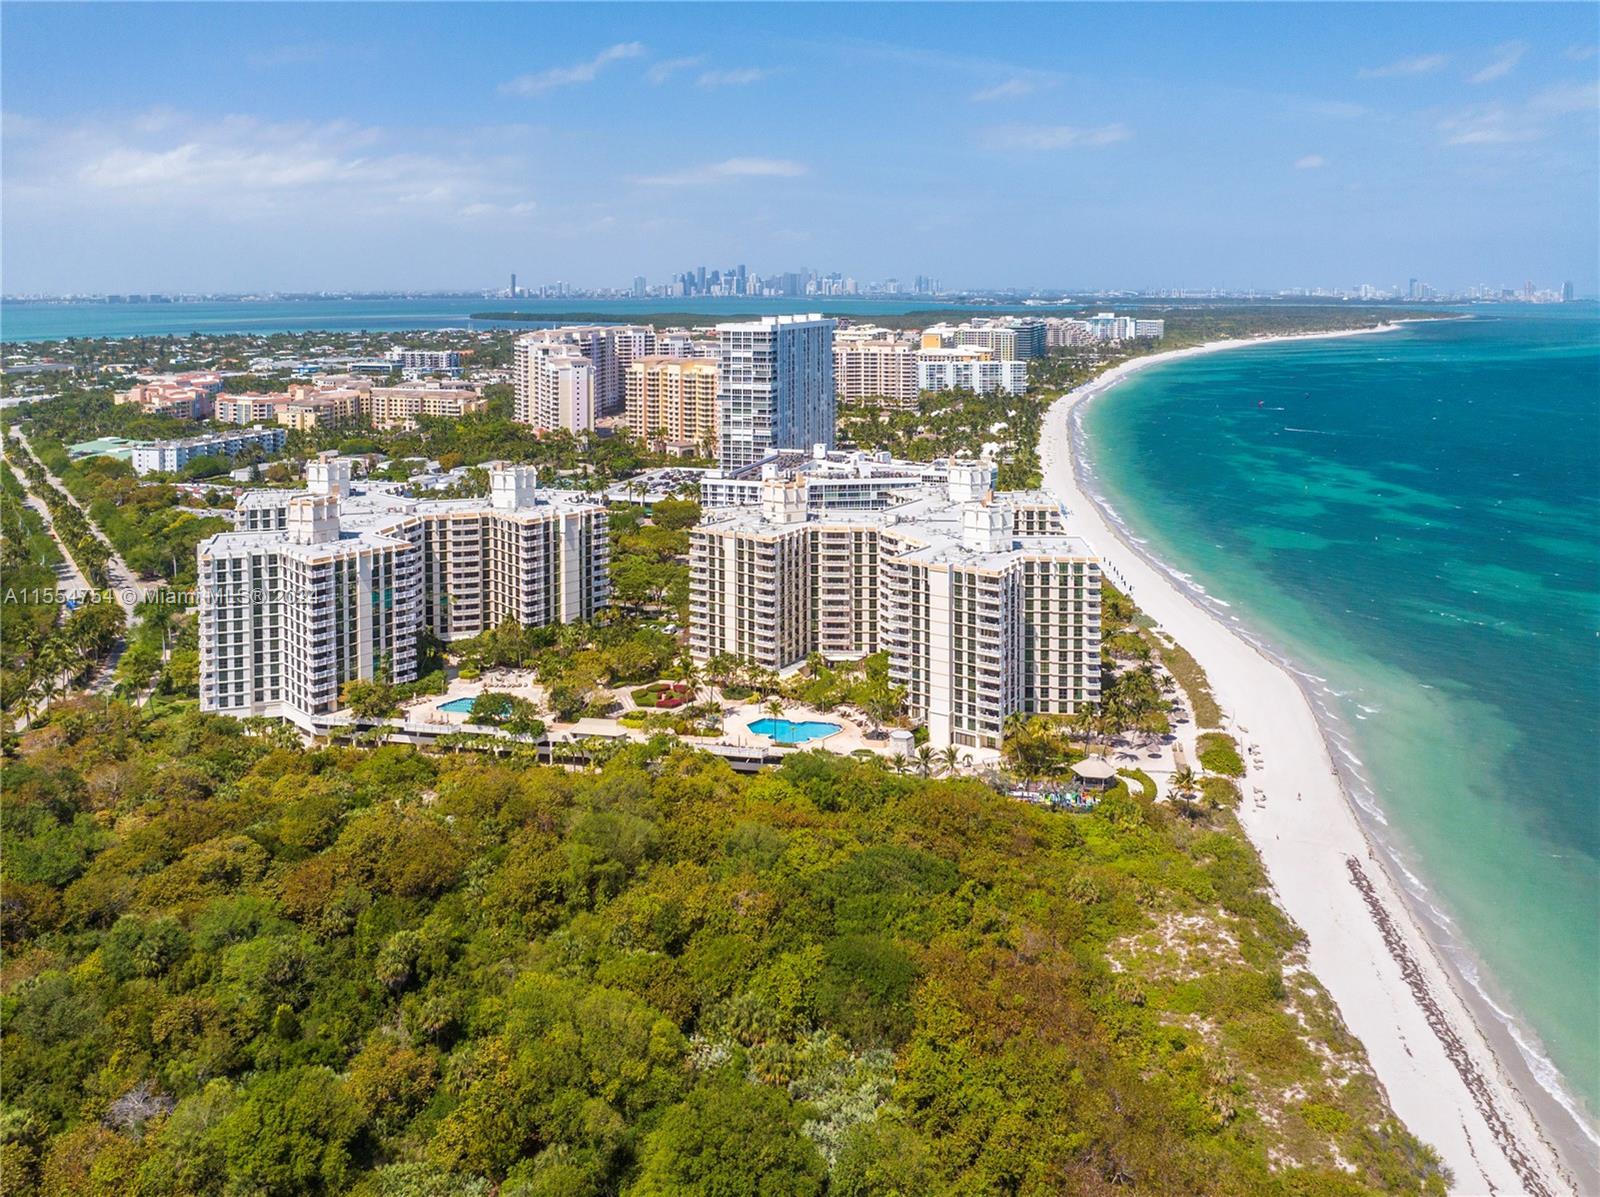 SPACIOUS 2 BED, 2 BATH UNIT AT THE TOWERS OF KEY BISCAYNE. INTERIOR FEATURES INCLUDE: 1,409 SF, EAT 